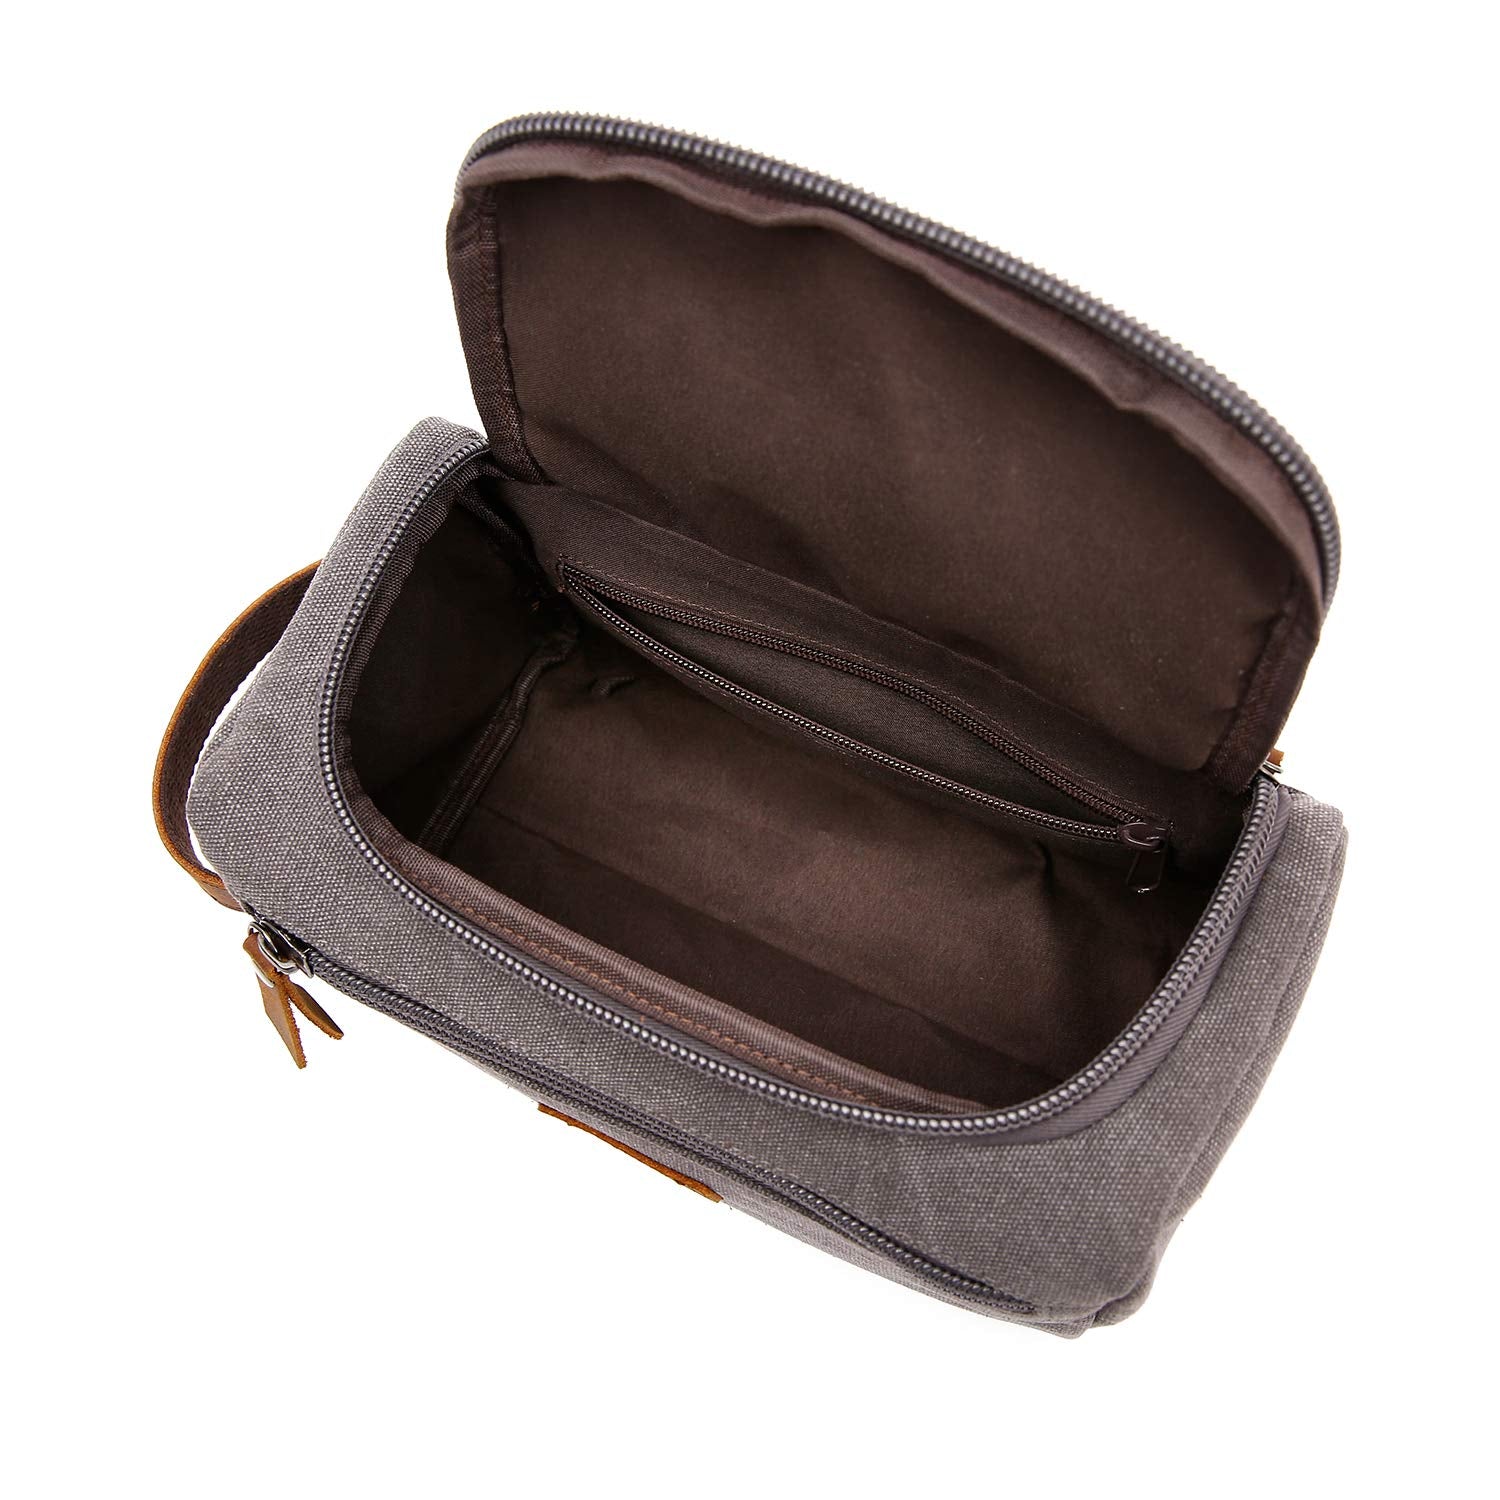 Zipper Brown Mens Travelling Hand Pouch Bag, For Personal